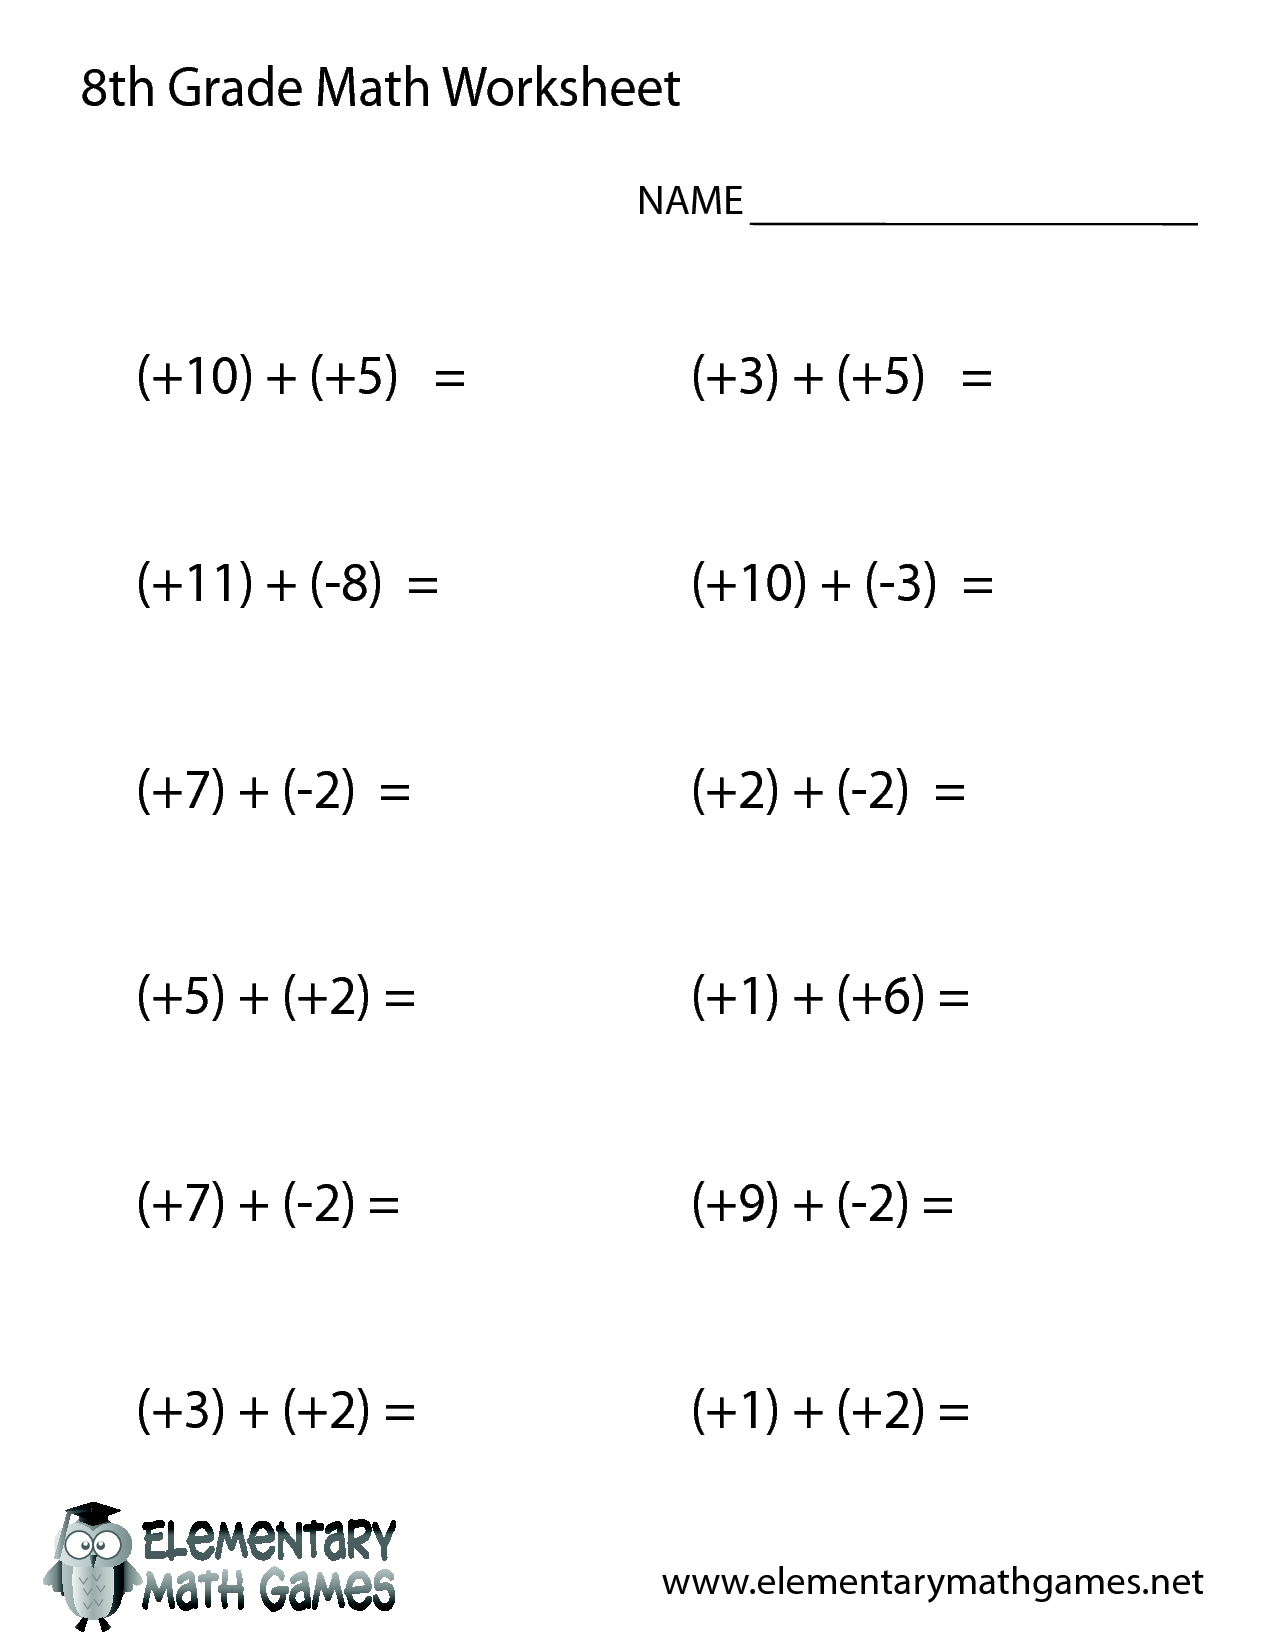 14-best-images-of-7th-grade-math-worksheets-to-print-7th-grade-math